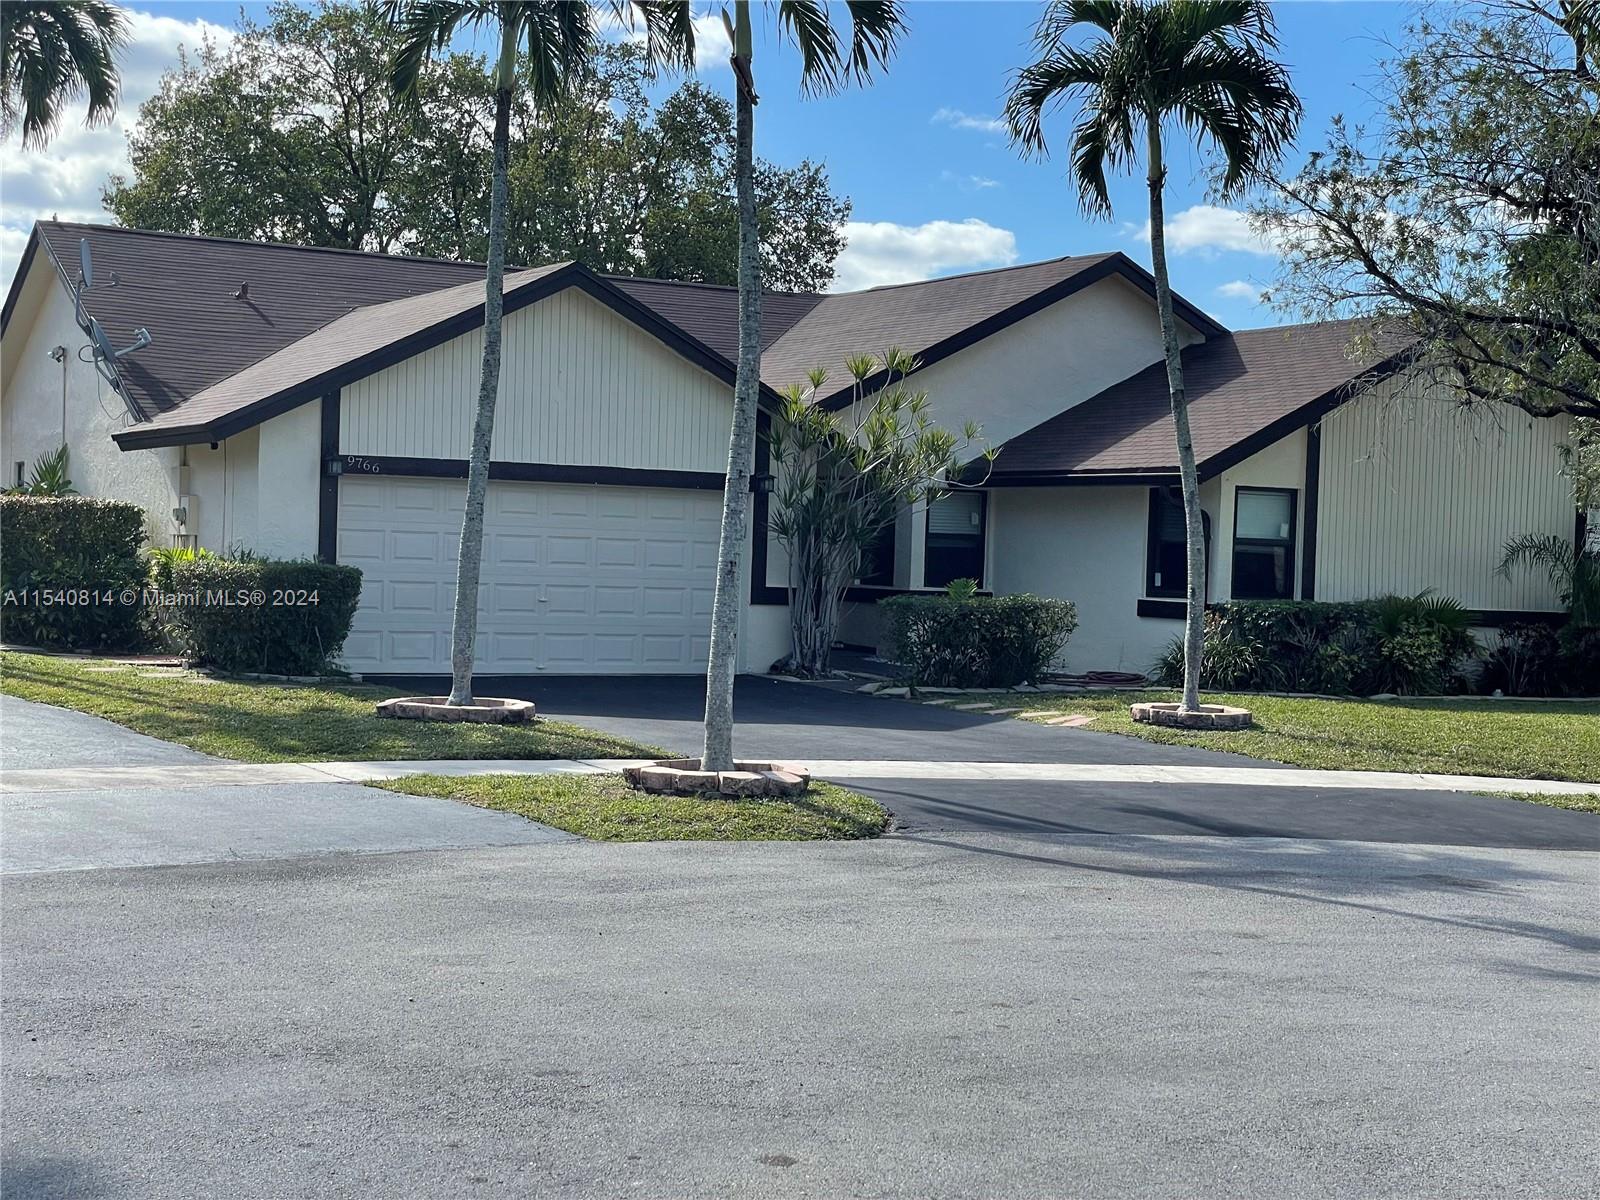 9766 Nw 41st St St, Sunrise, Miami-Dade County, Florida - 3 Bedrooms  
2 Bathrooms - 